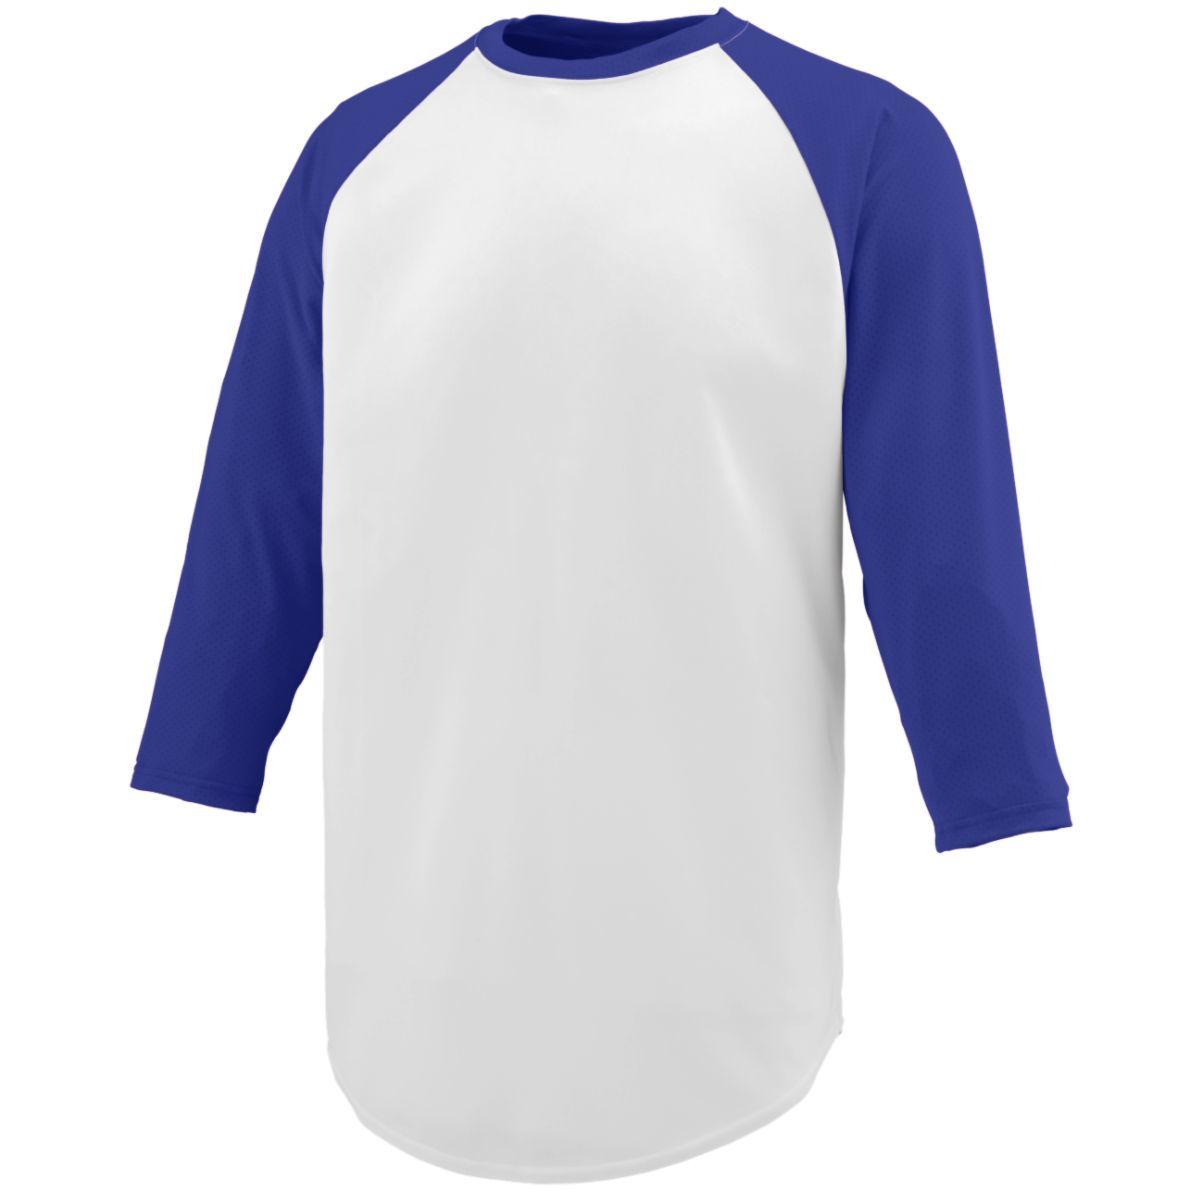 Augusta Sportswear Youth Nova Jersey in White/Purple  -Part of the Youth, Youth-Jersey, Augusta-Products, Baseball, Shirts, All-Sports, All-Sports-1 product lines at KanaleyCreations.com